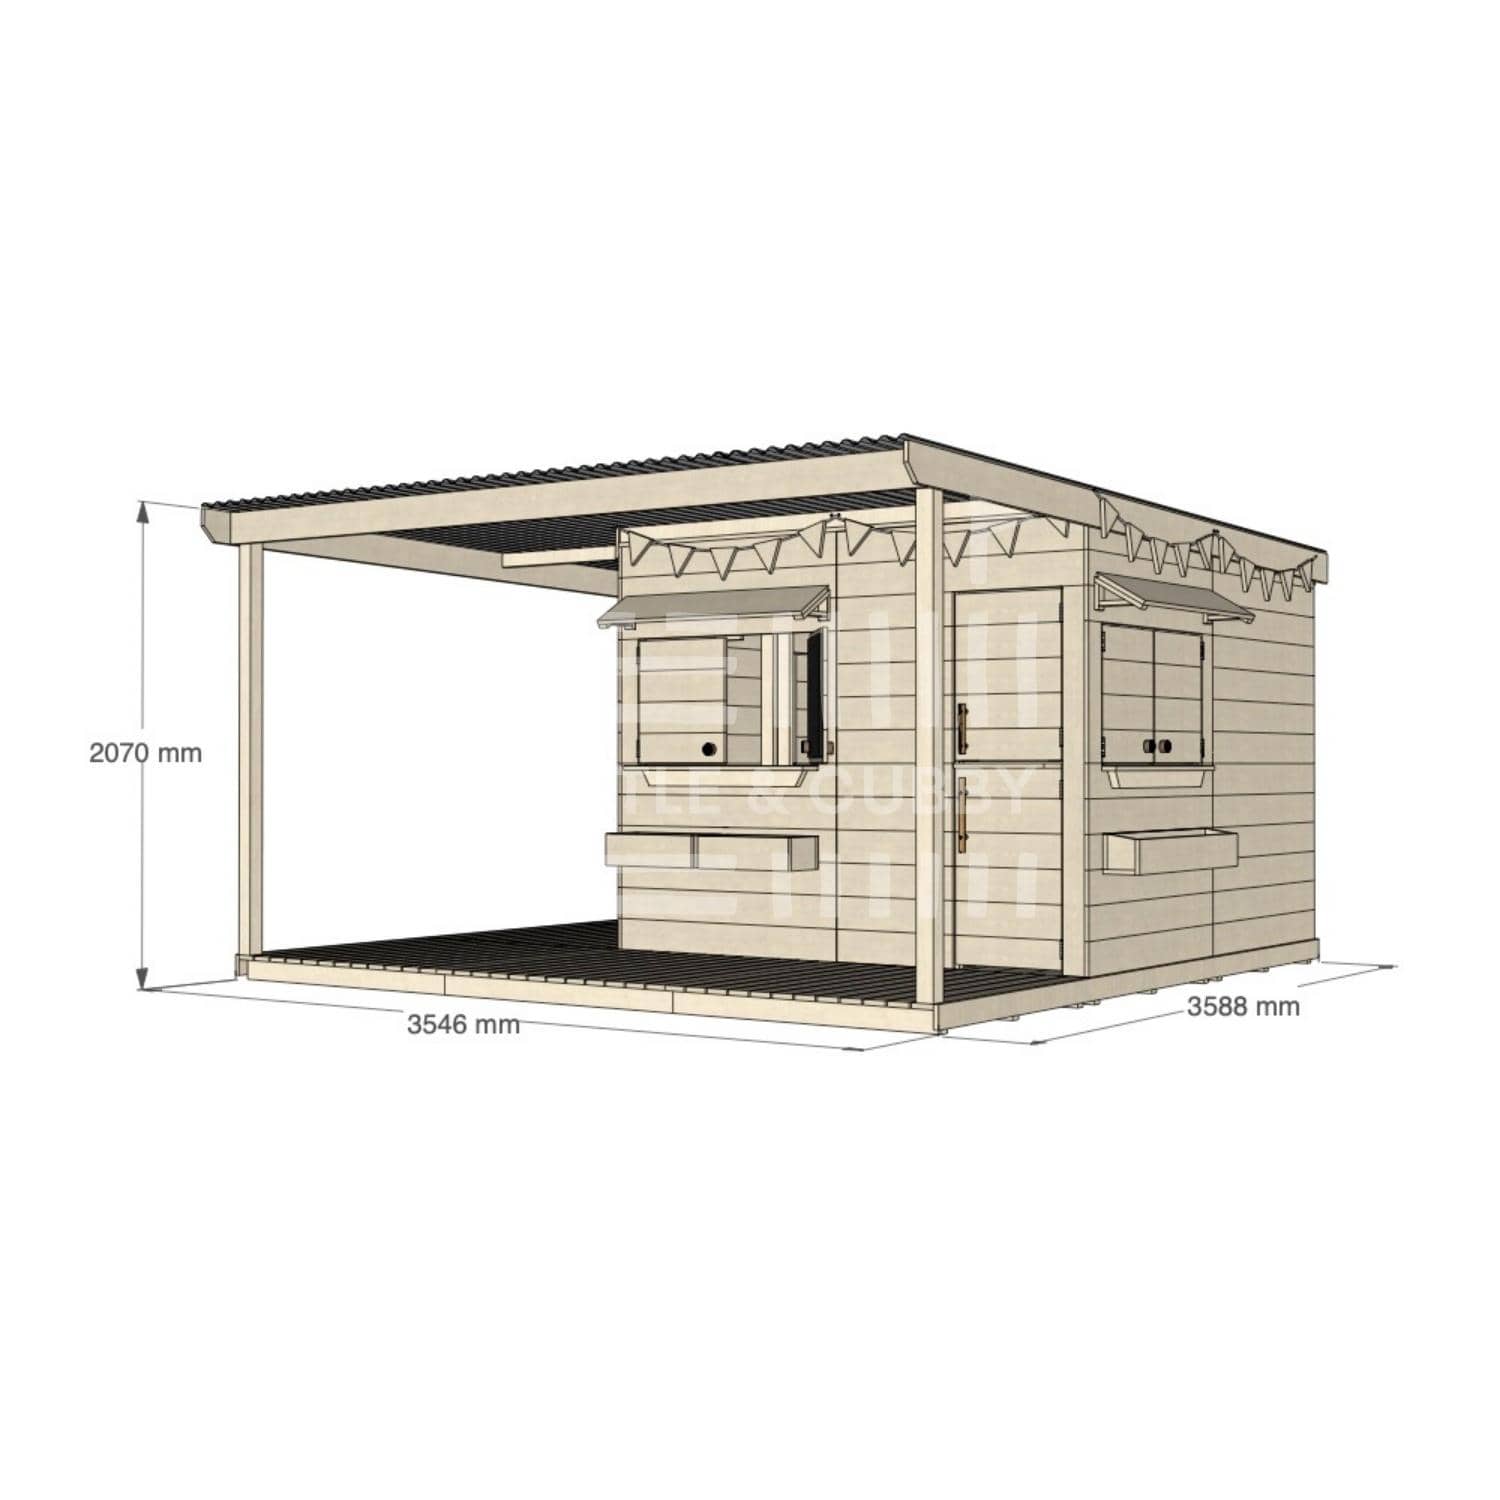 Raw pine extended height cubby house with wraparound verandah for residential backyards large square size with dimensions